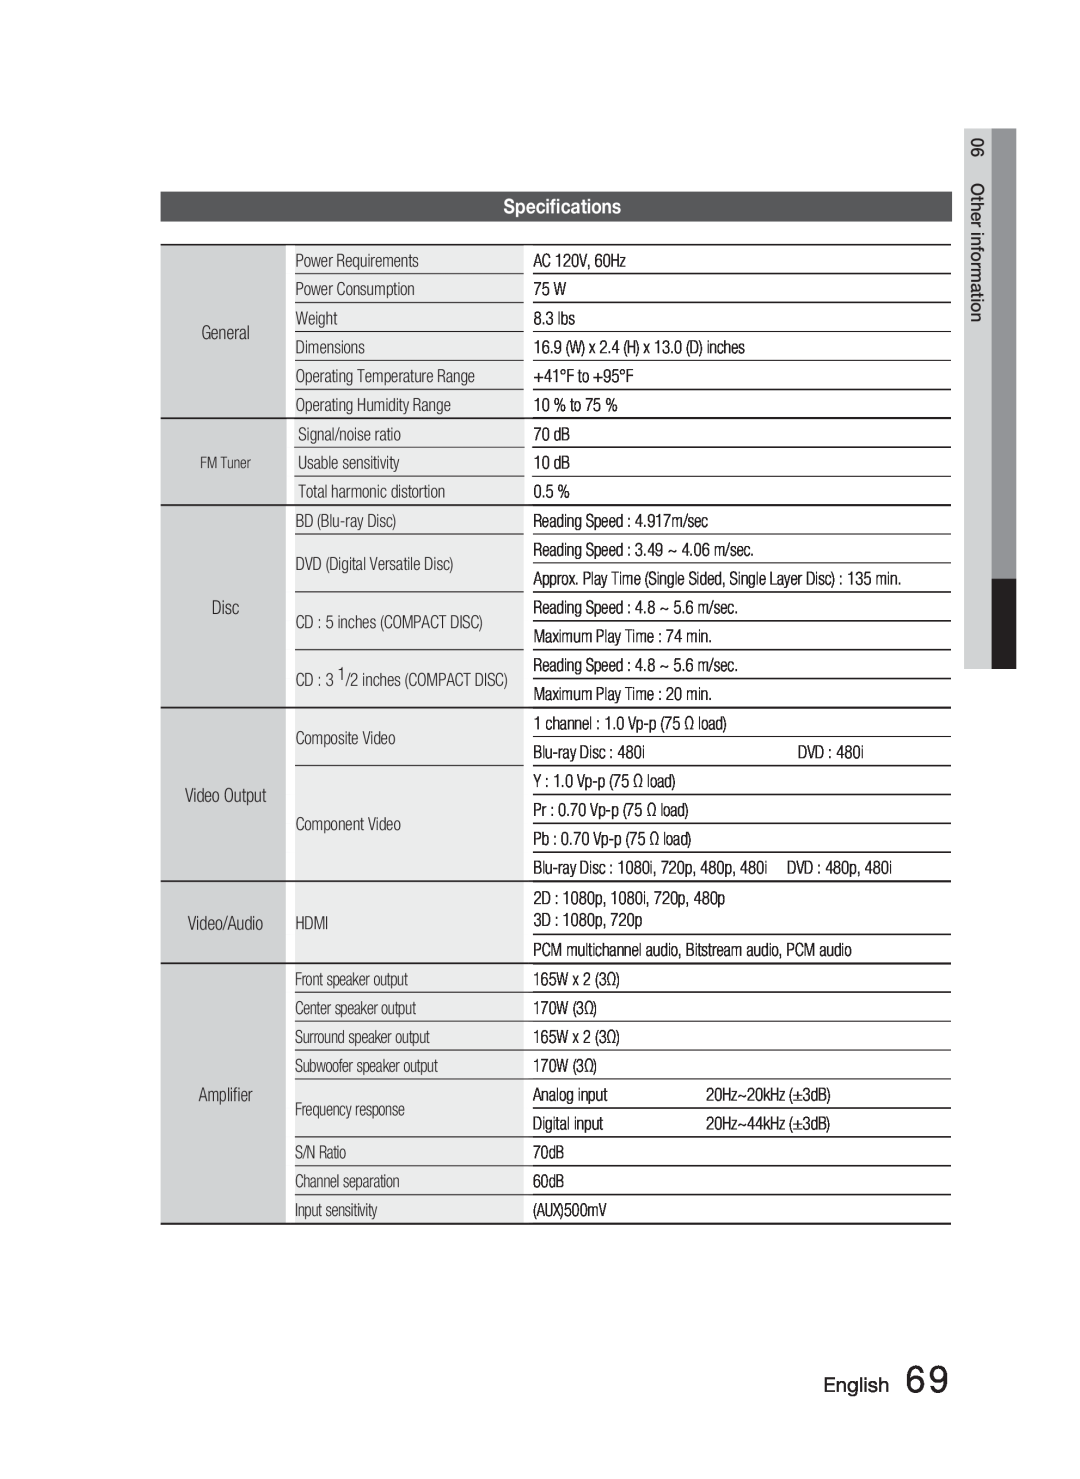 Samsung HT-C6900W user manual Speciﬁcations, English 